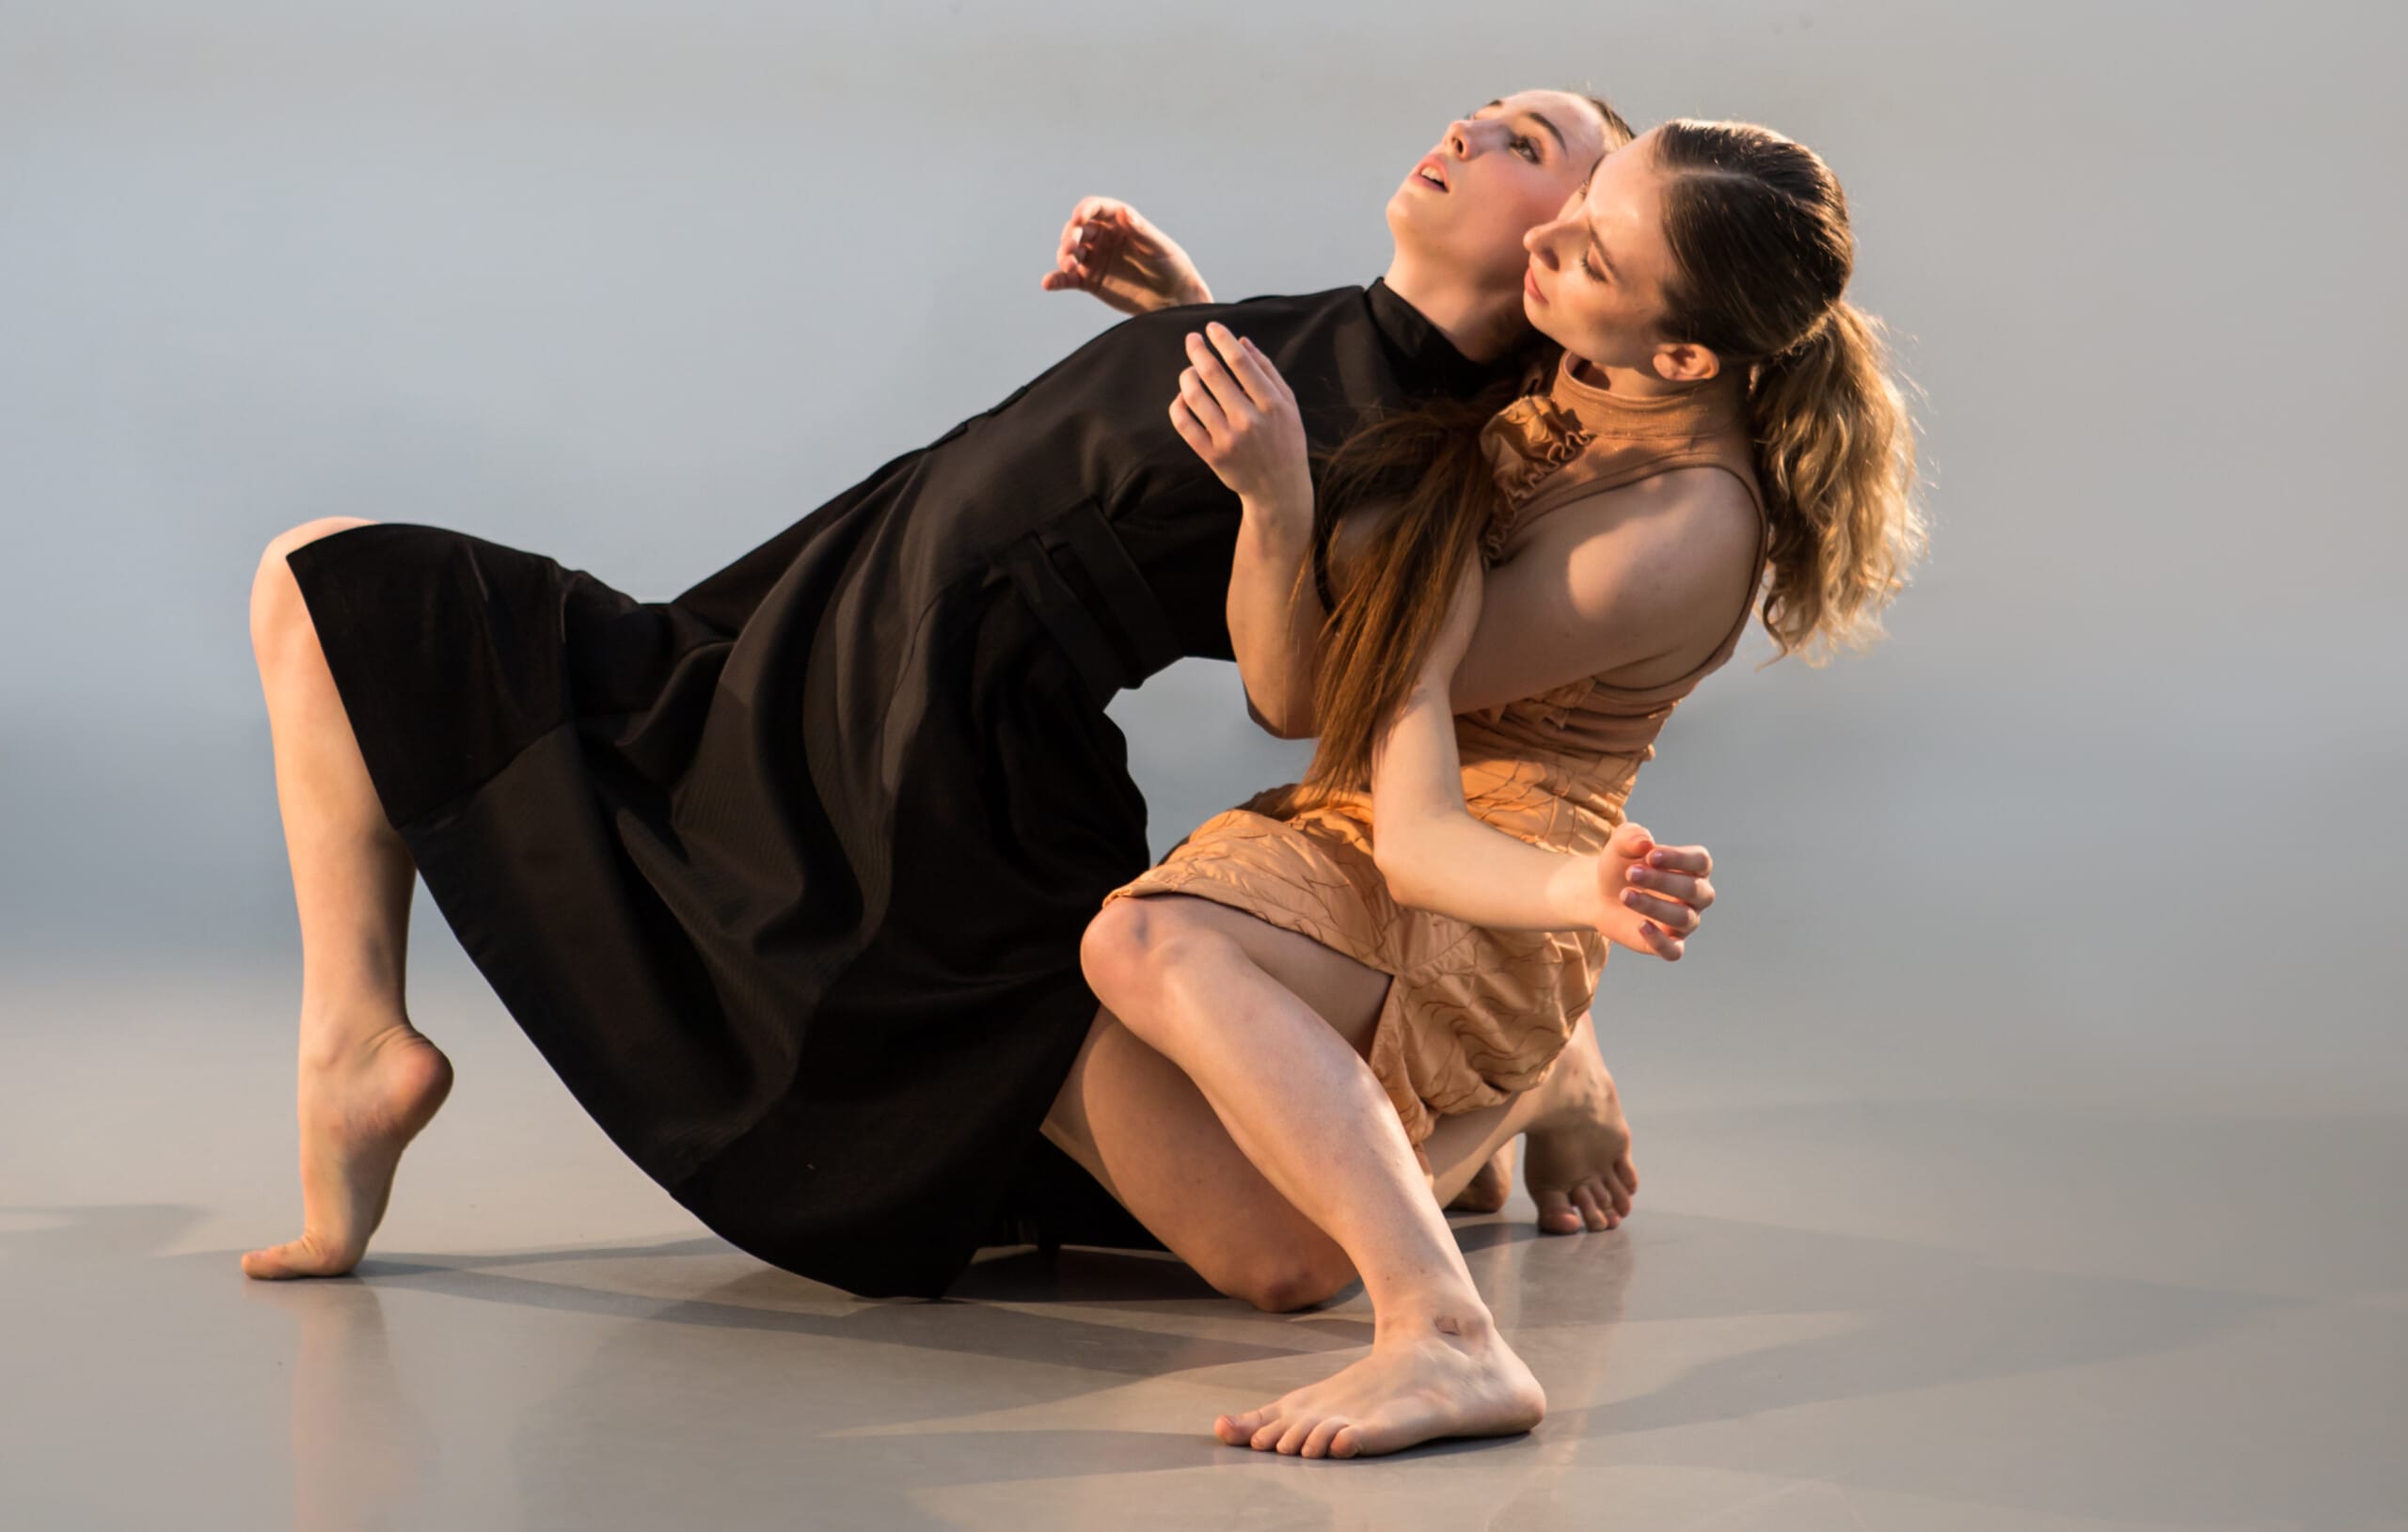 Two female dancers engage in floor work. The performer on the left wears a black dress and leans backwards. The performer on the right wears a nude dress, and supports her fellow performer in a duet pose.